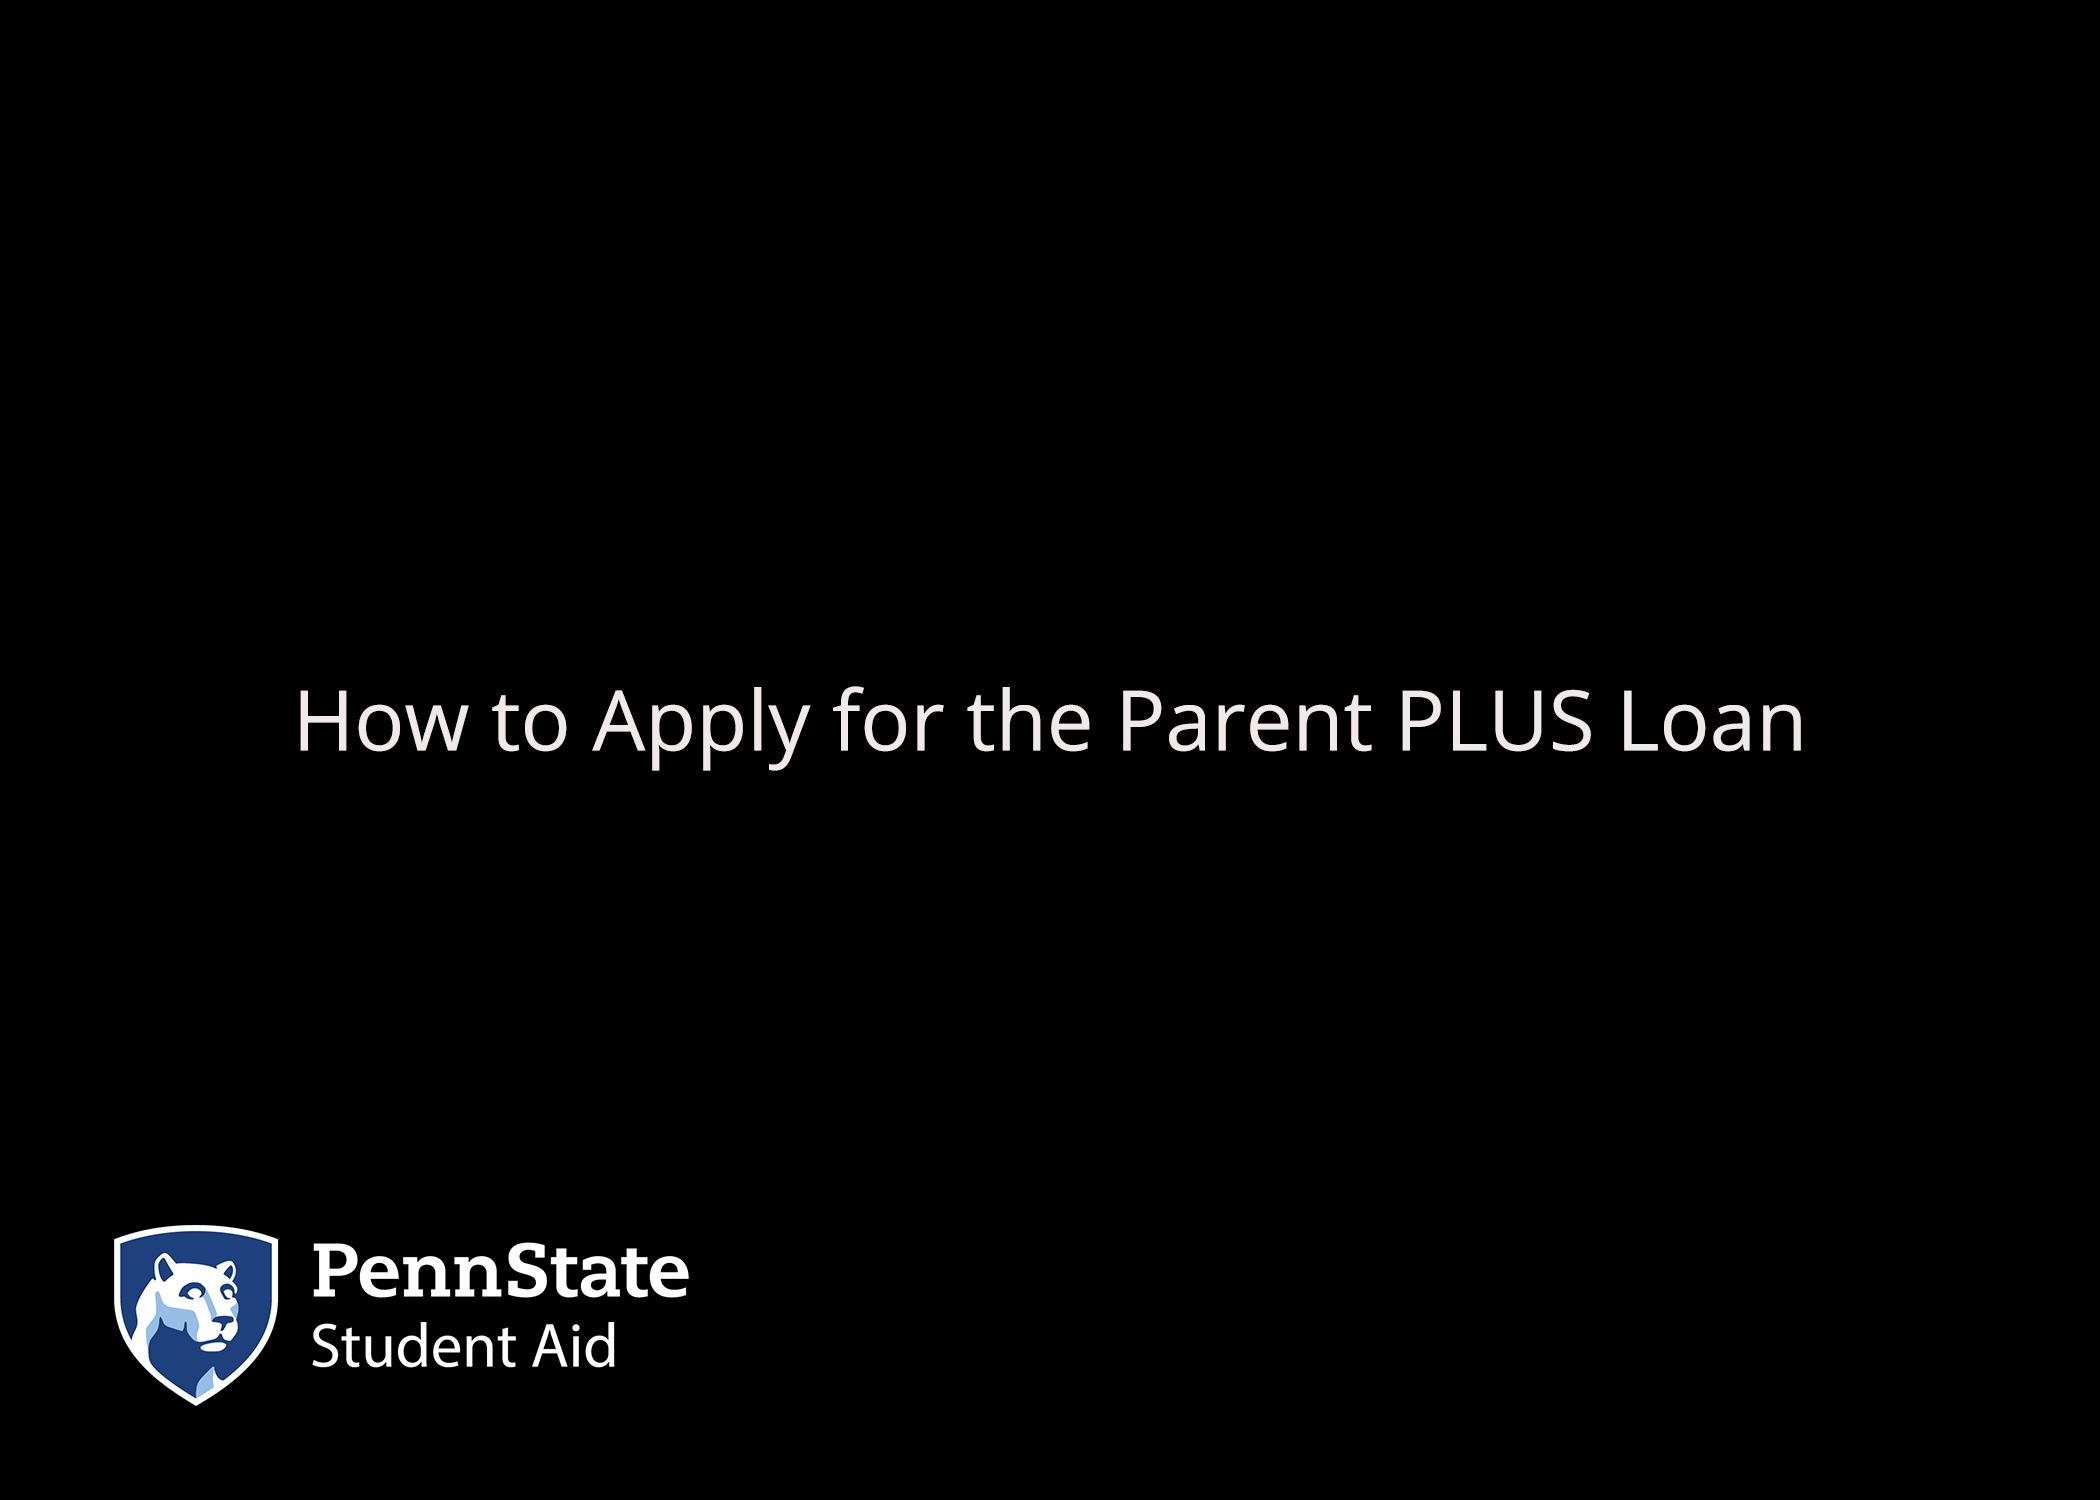 Learn how to apply for the Parent PLUS loan.